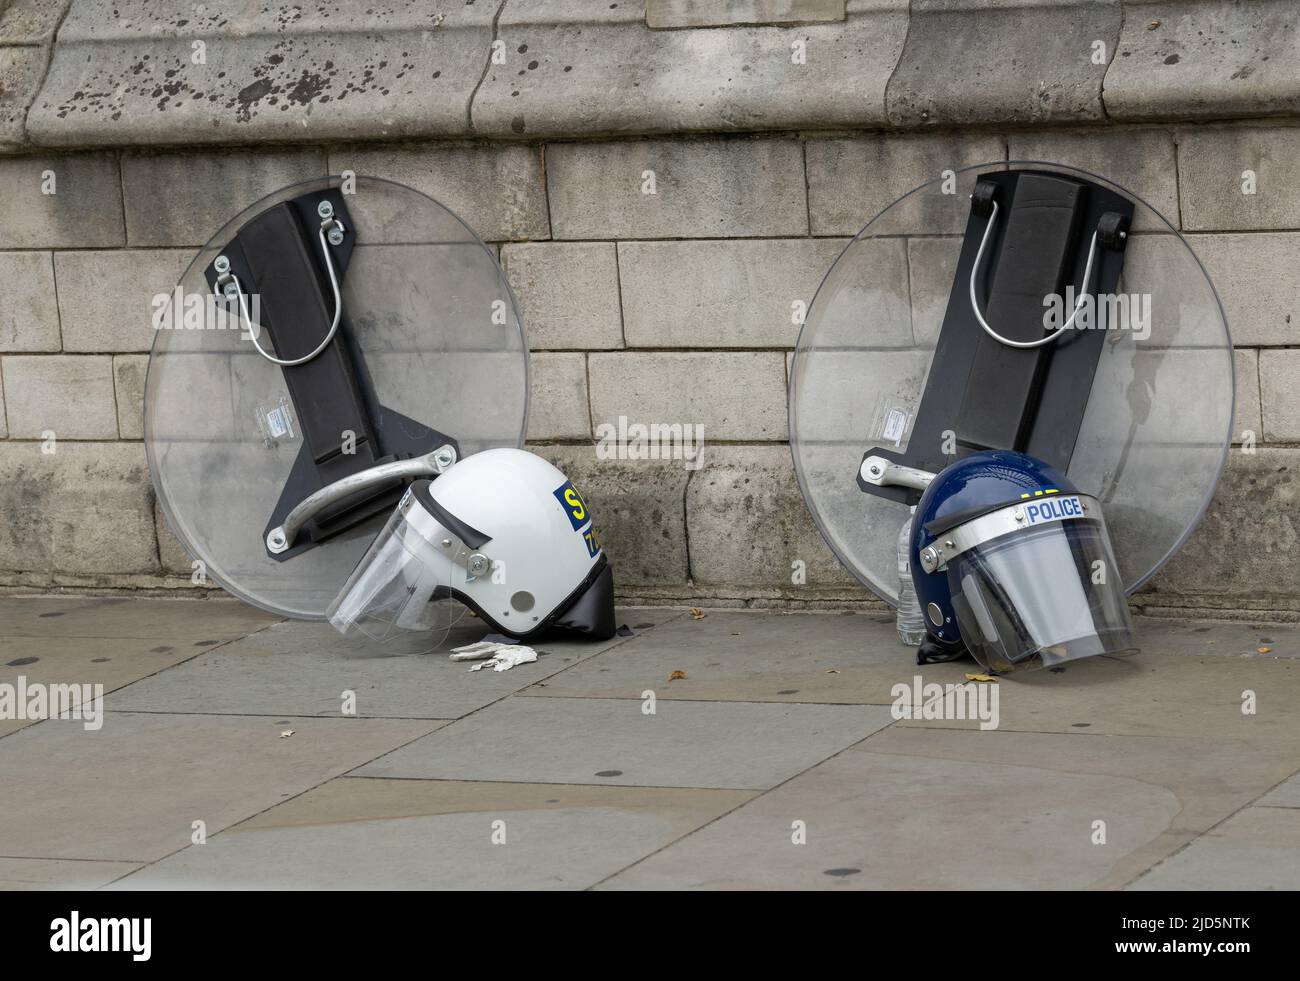 London, UK. 18th June, 2020. Trade union movement leads a national demonstration calling on the government to act to tackle the cost of living crisis. The police were prepared for trouble with riot shields and helmets, Credit: Ian Davidson/Alamy Live News Stock Photo